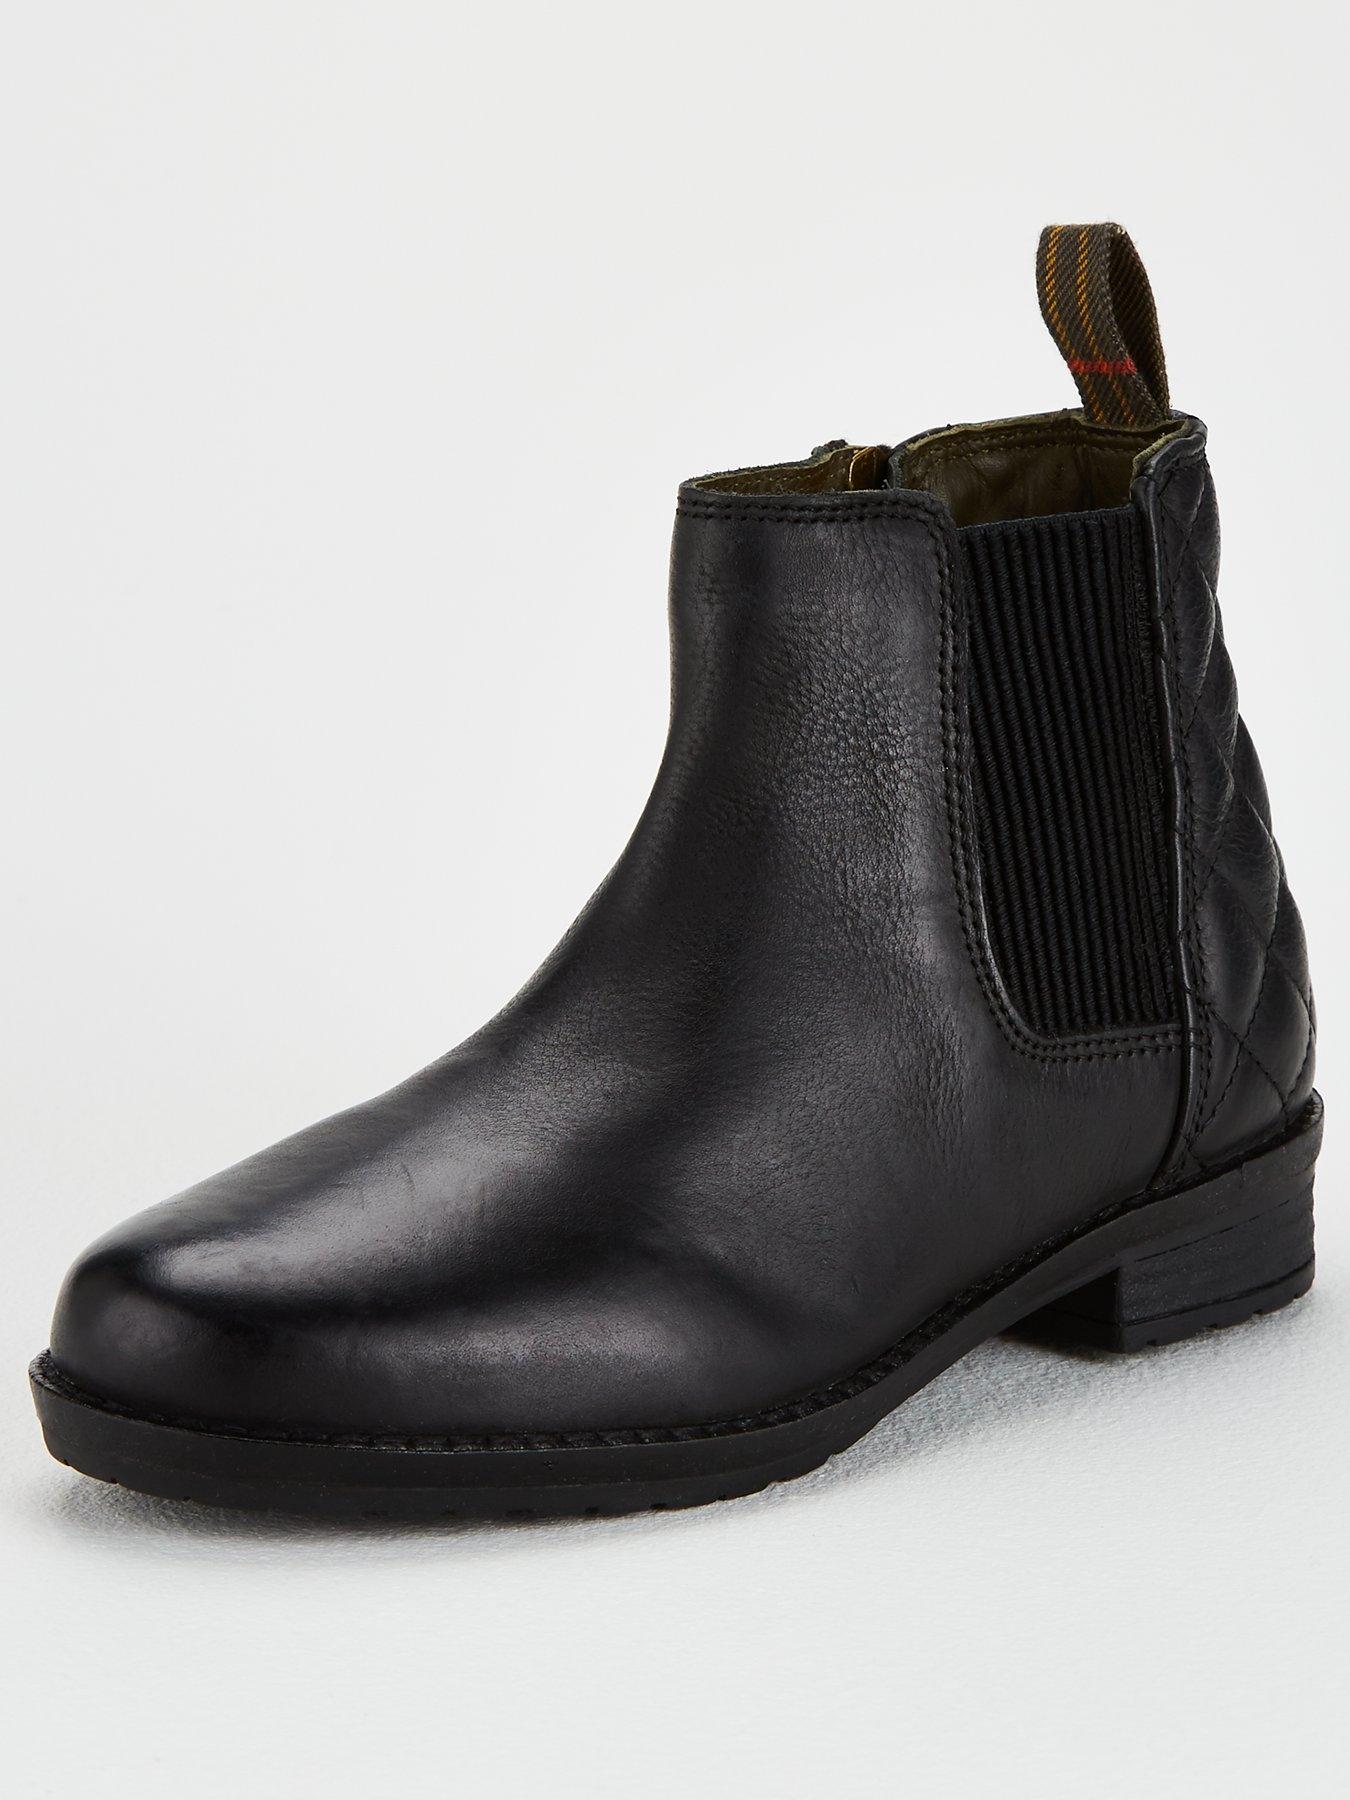 abercrombie aftershave boots